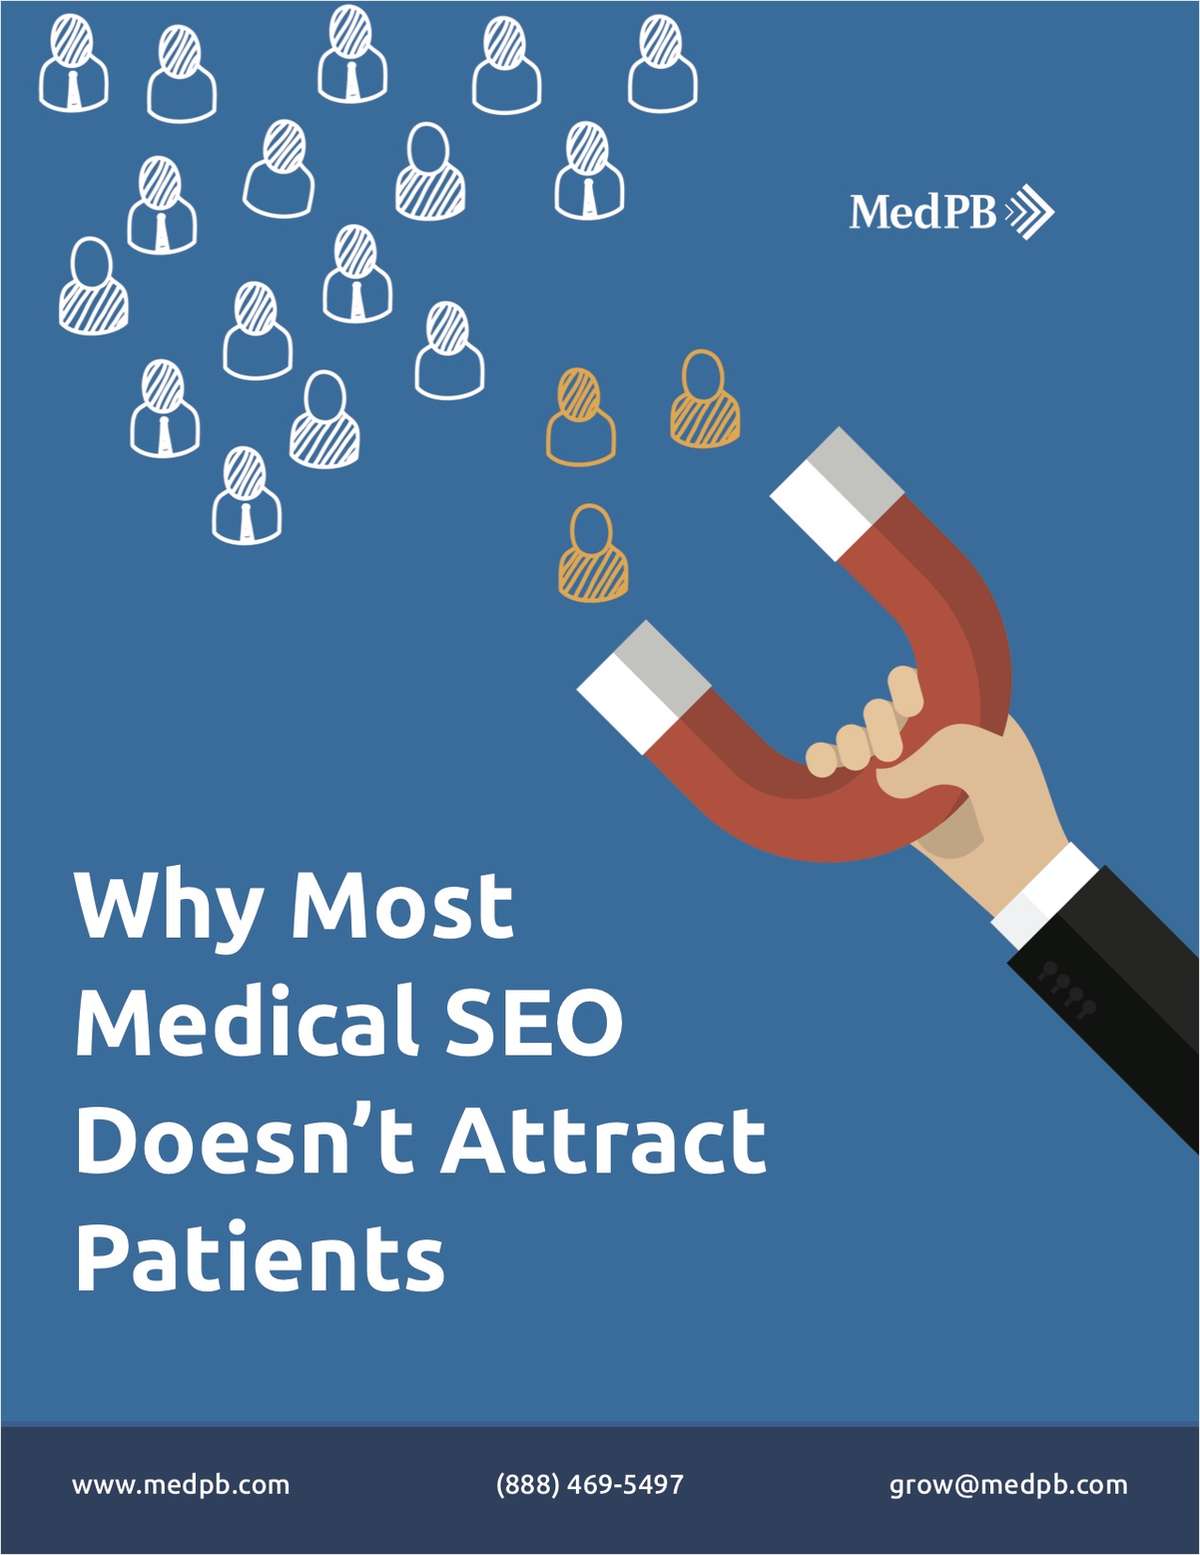 Why Most Medical SEO Doesn't Attract Patients